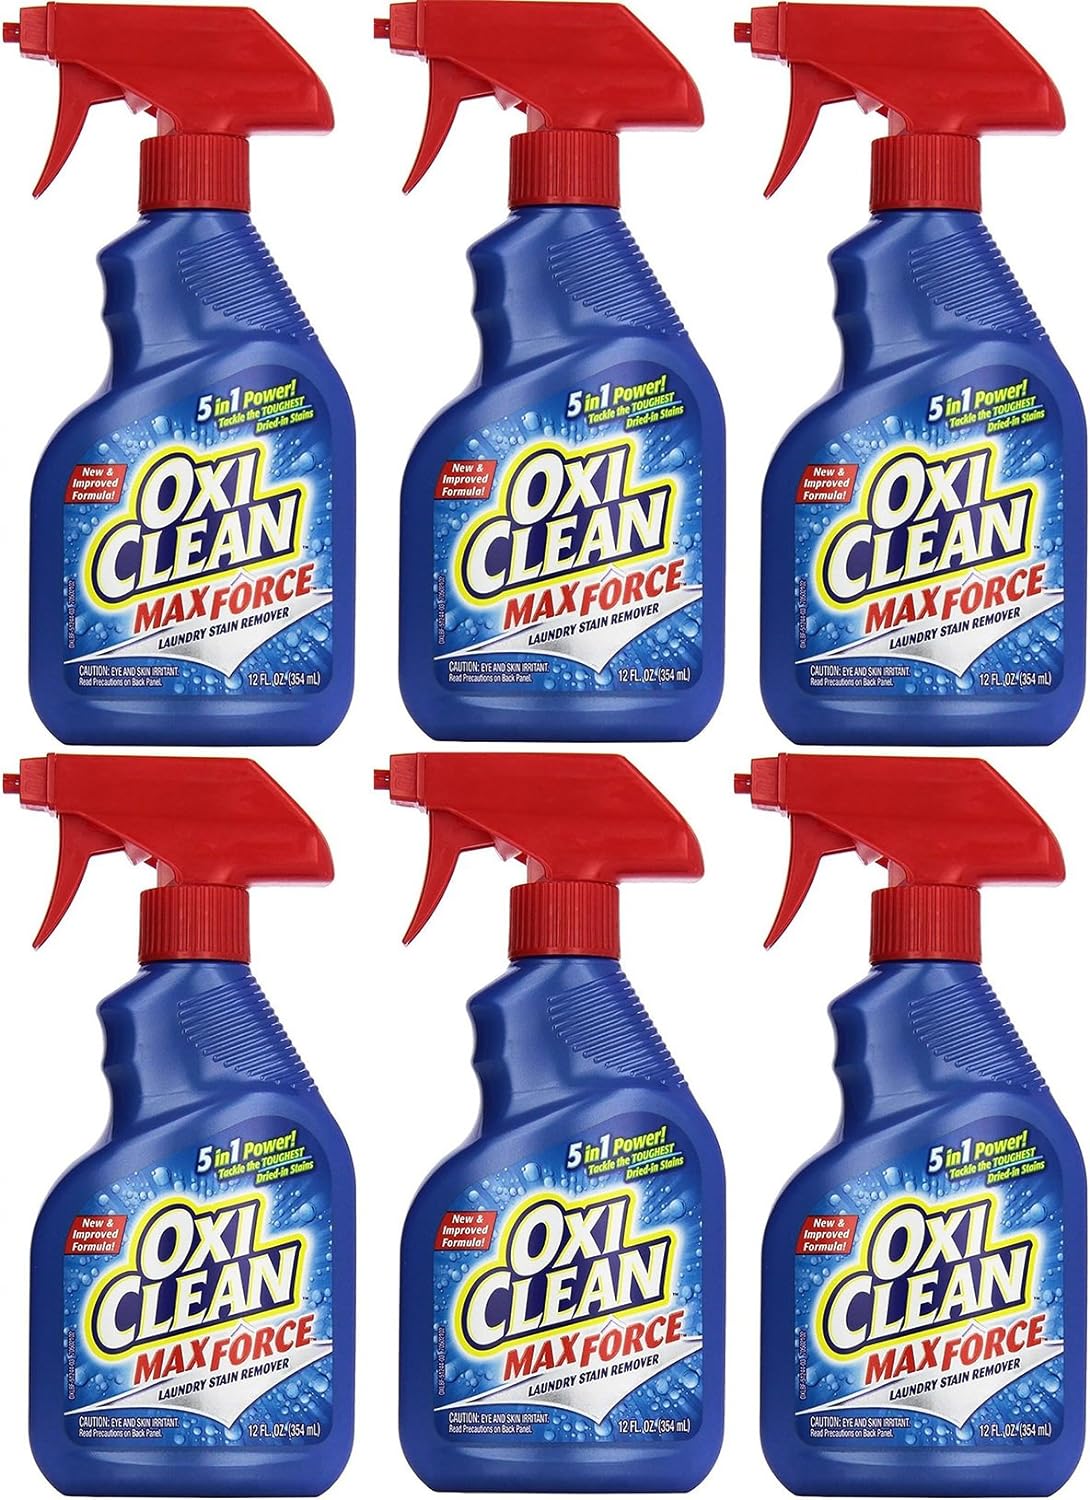 OxiClean Max Force Laundry Stain Remover Spray, 12 Fl Oz (Pack of 6) : Health & Household